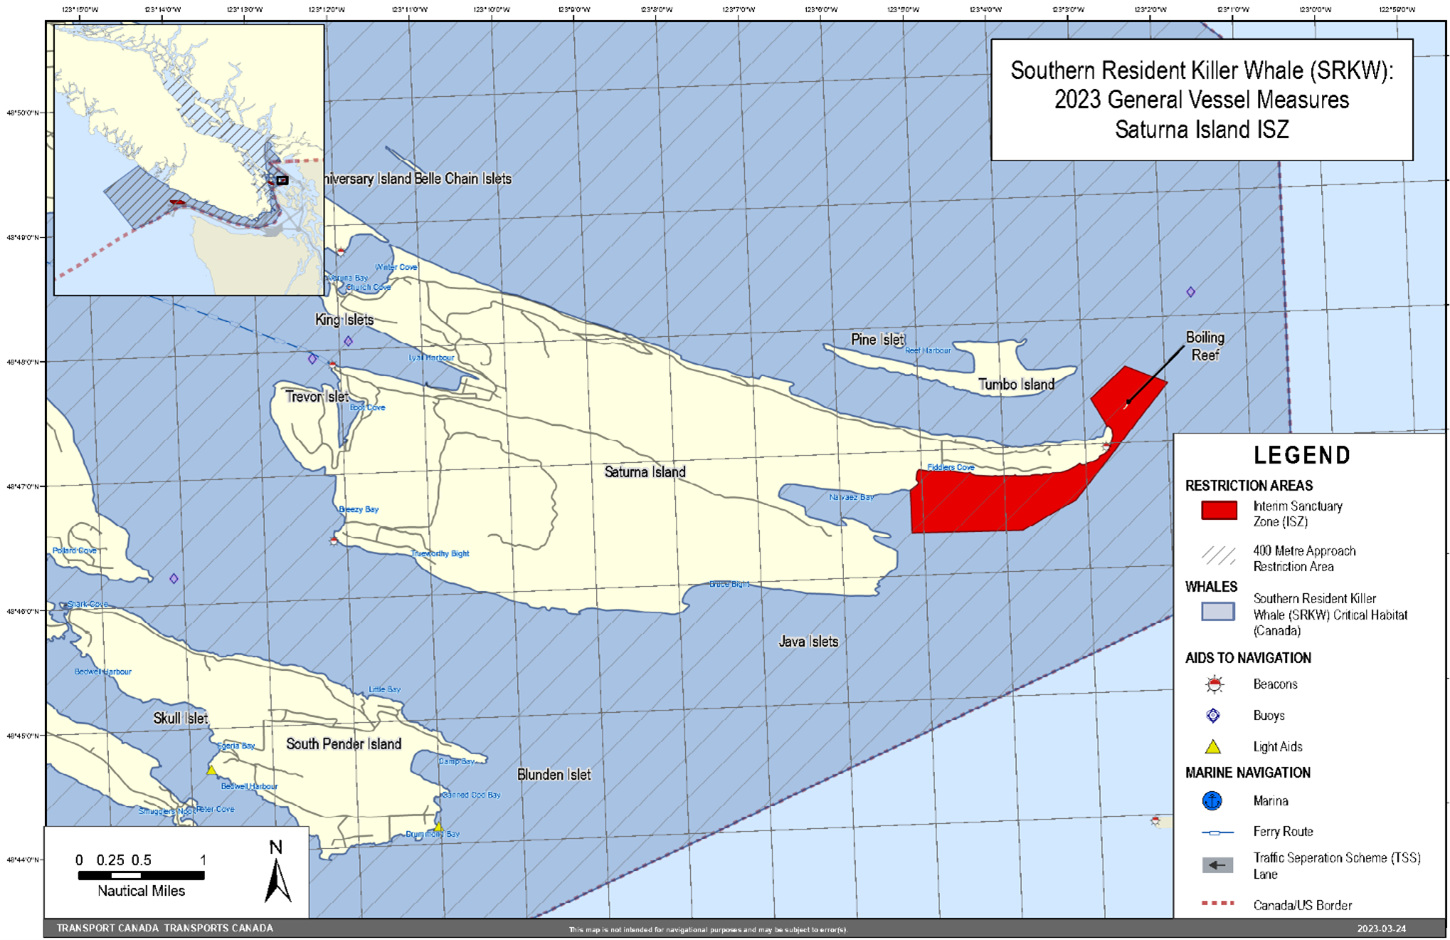 Rectangular map in grey, yellow and blue. It shows the Saturna Island interim sanctuary zone in red, as part of the general vessel measures for the Southern Resident Killer Whales.